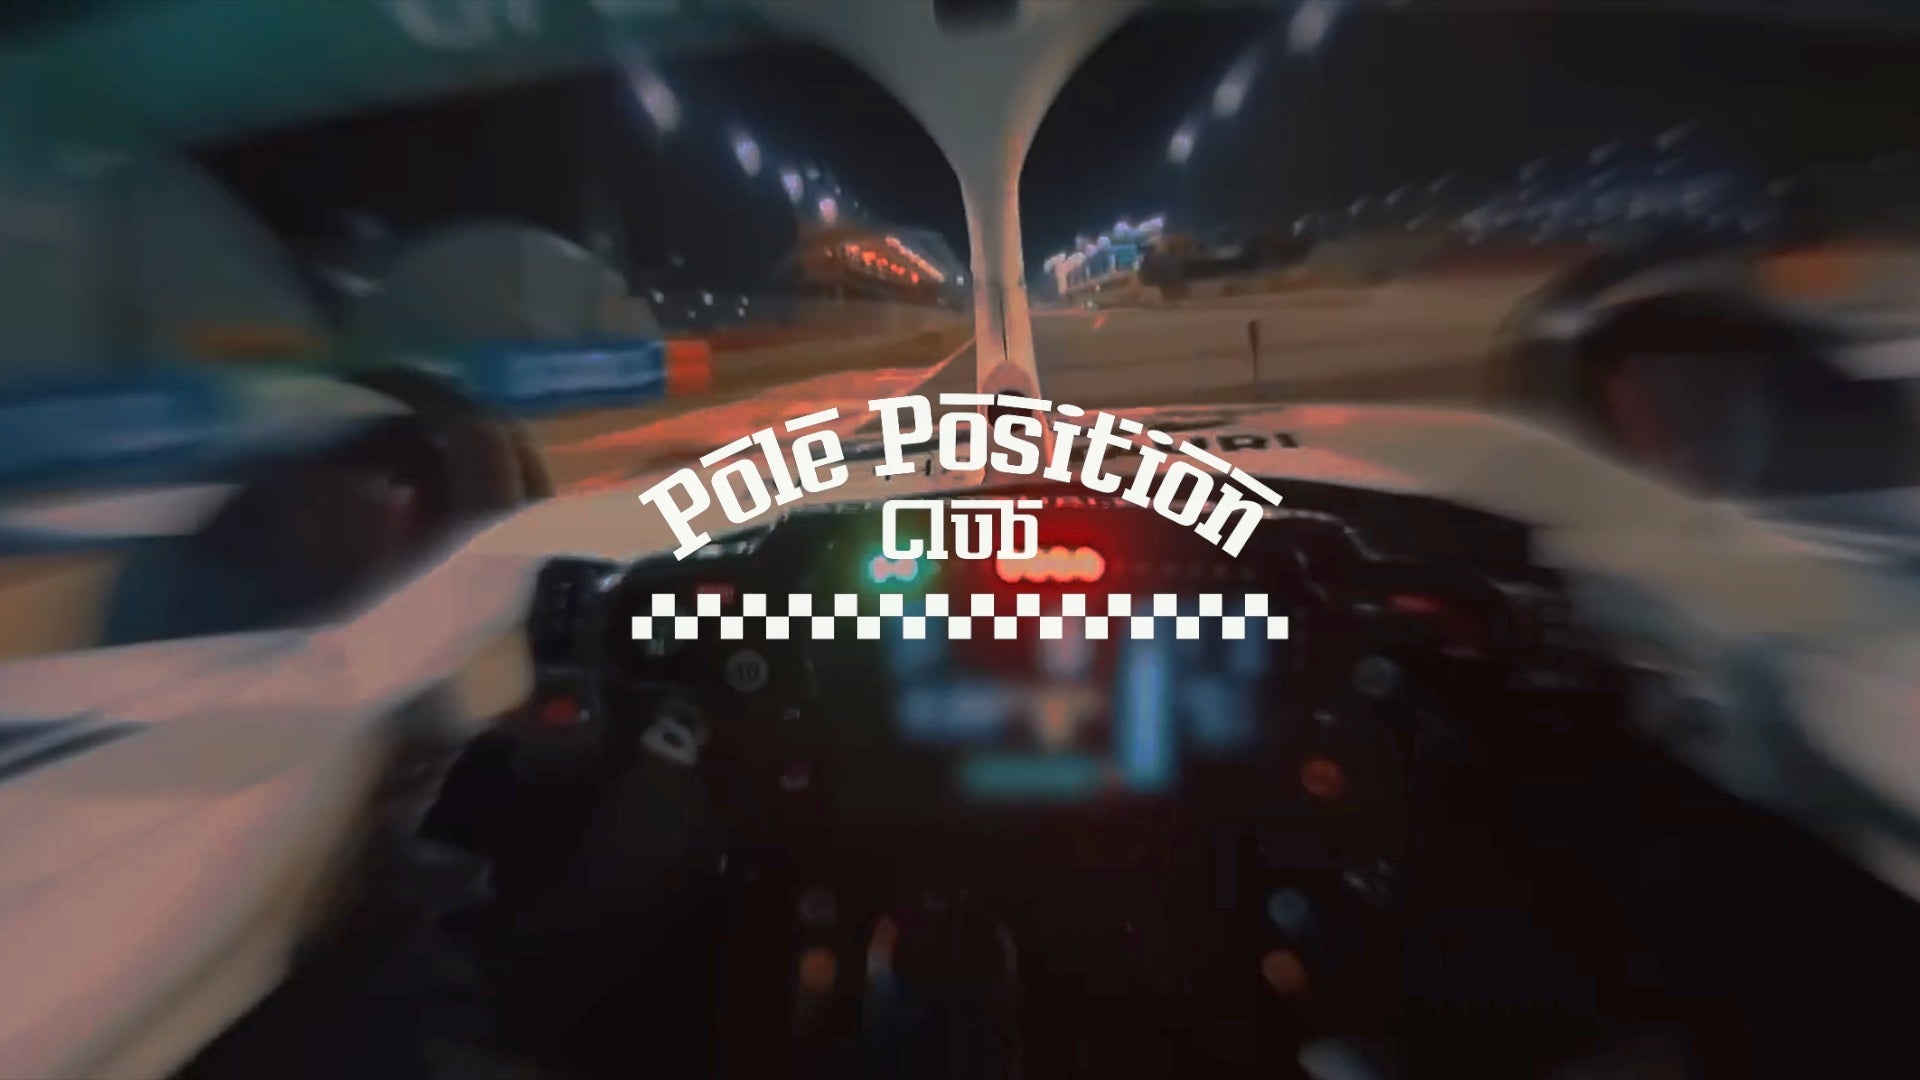 Load video: About pole position club. First place racingwear